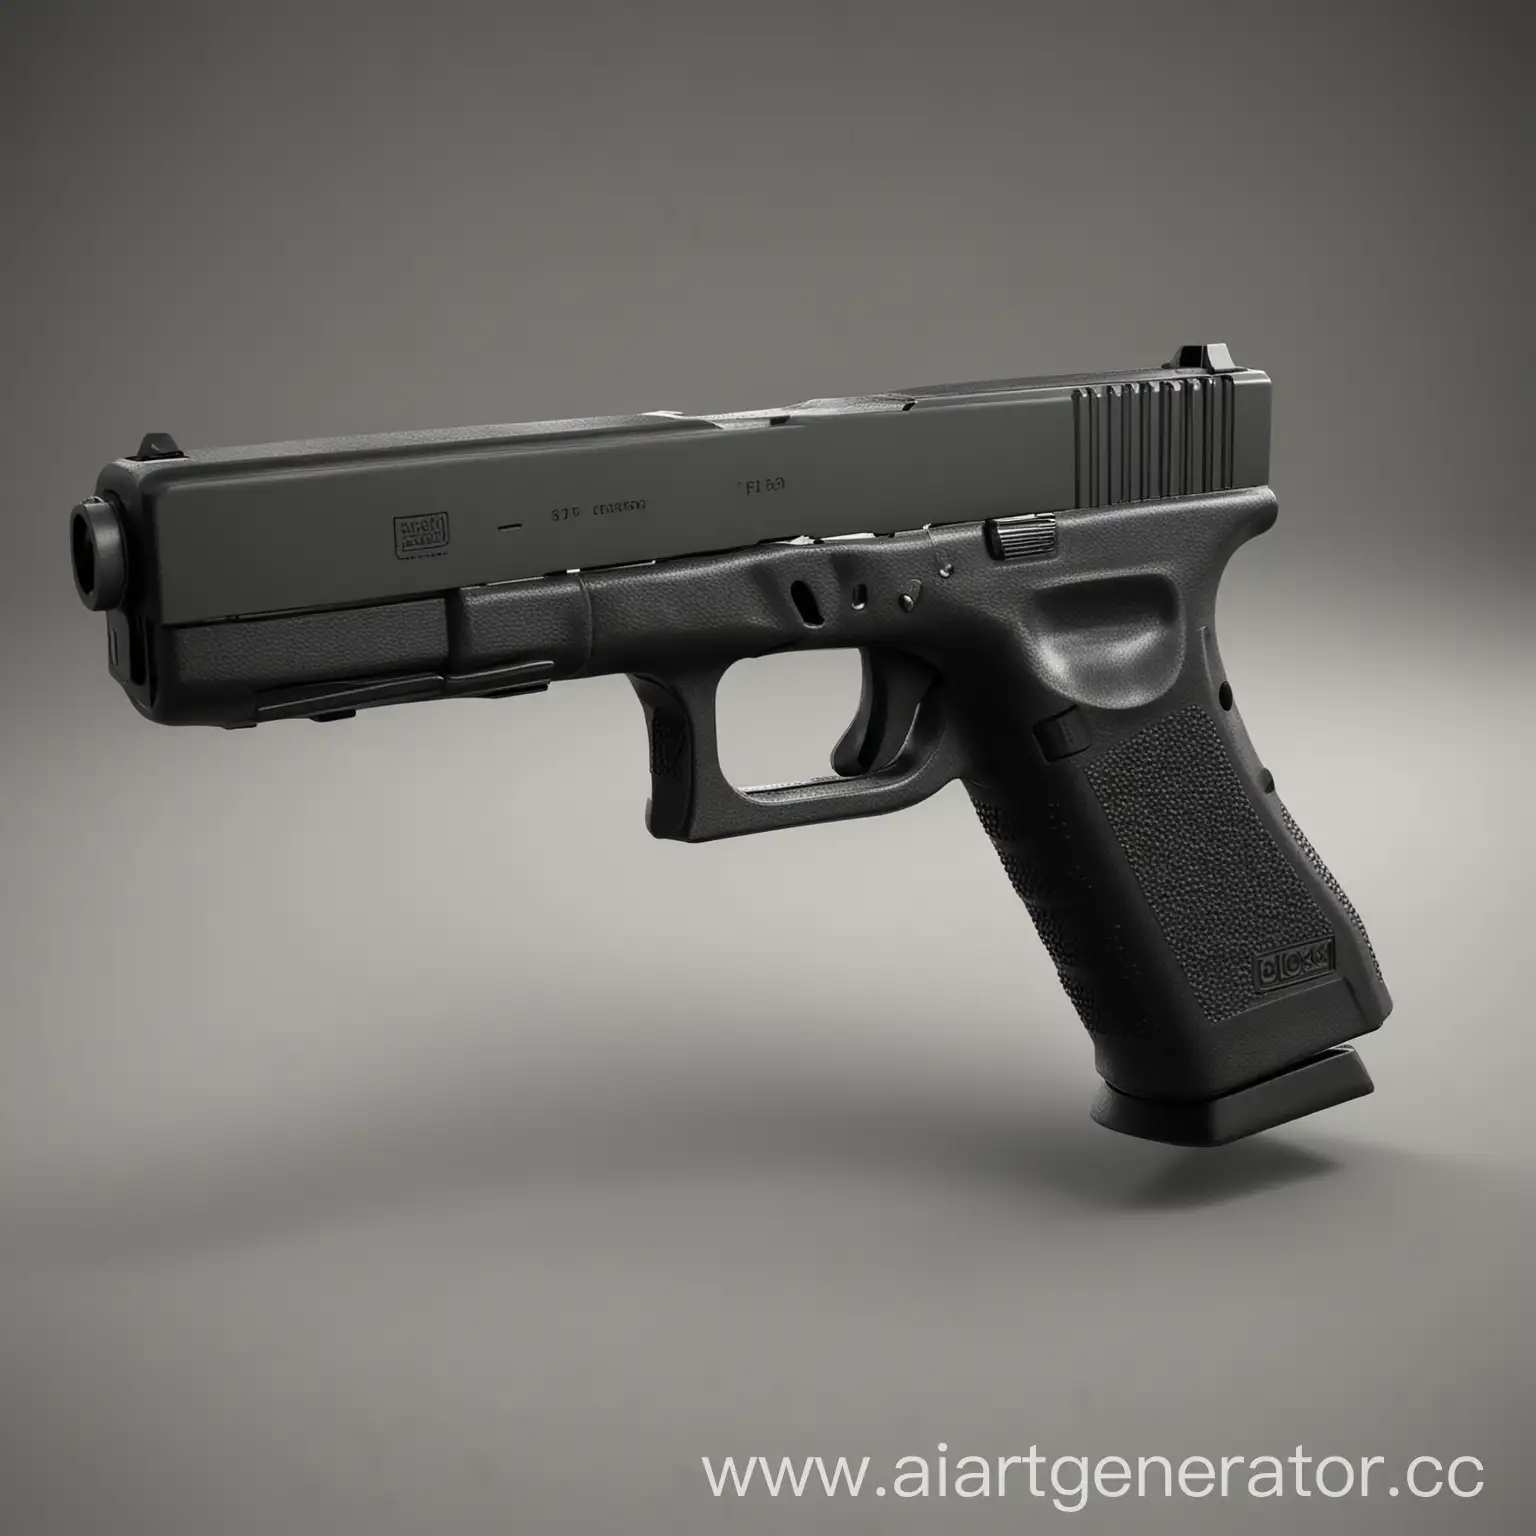 Detailed-3D-Model-of-Glock18-Pistol-for-Gaming-and-Simulation